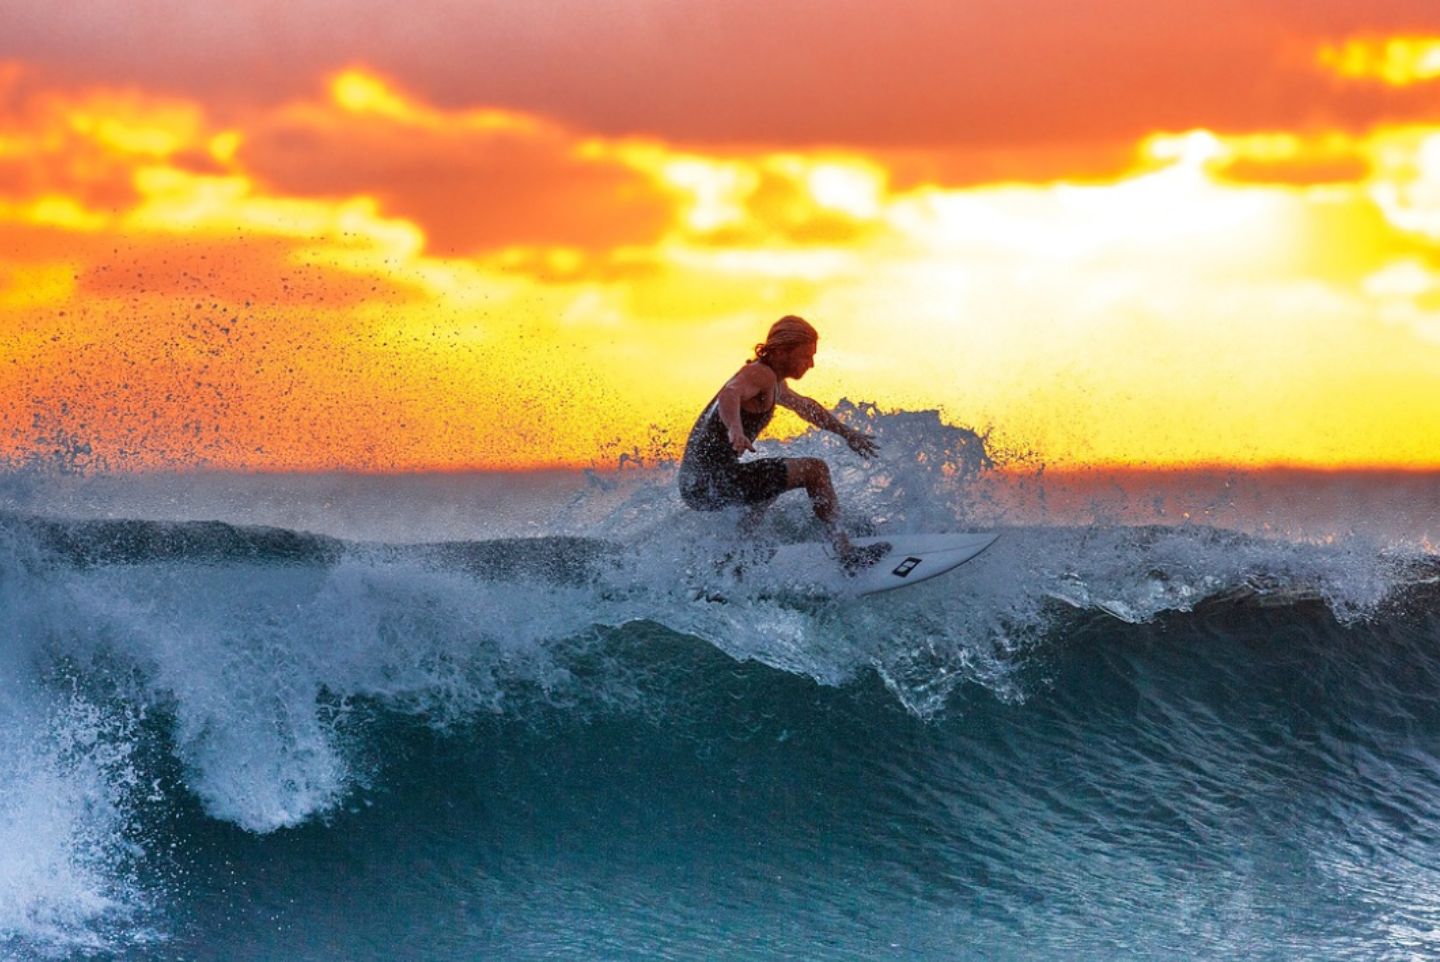 A Beginner's Guide to Surfing Fashion - All You Need to Know